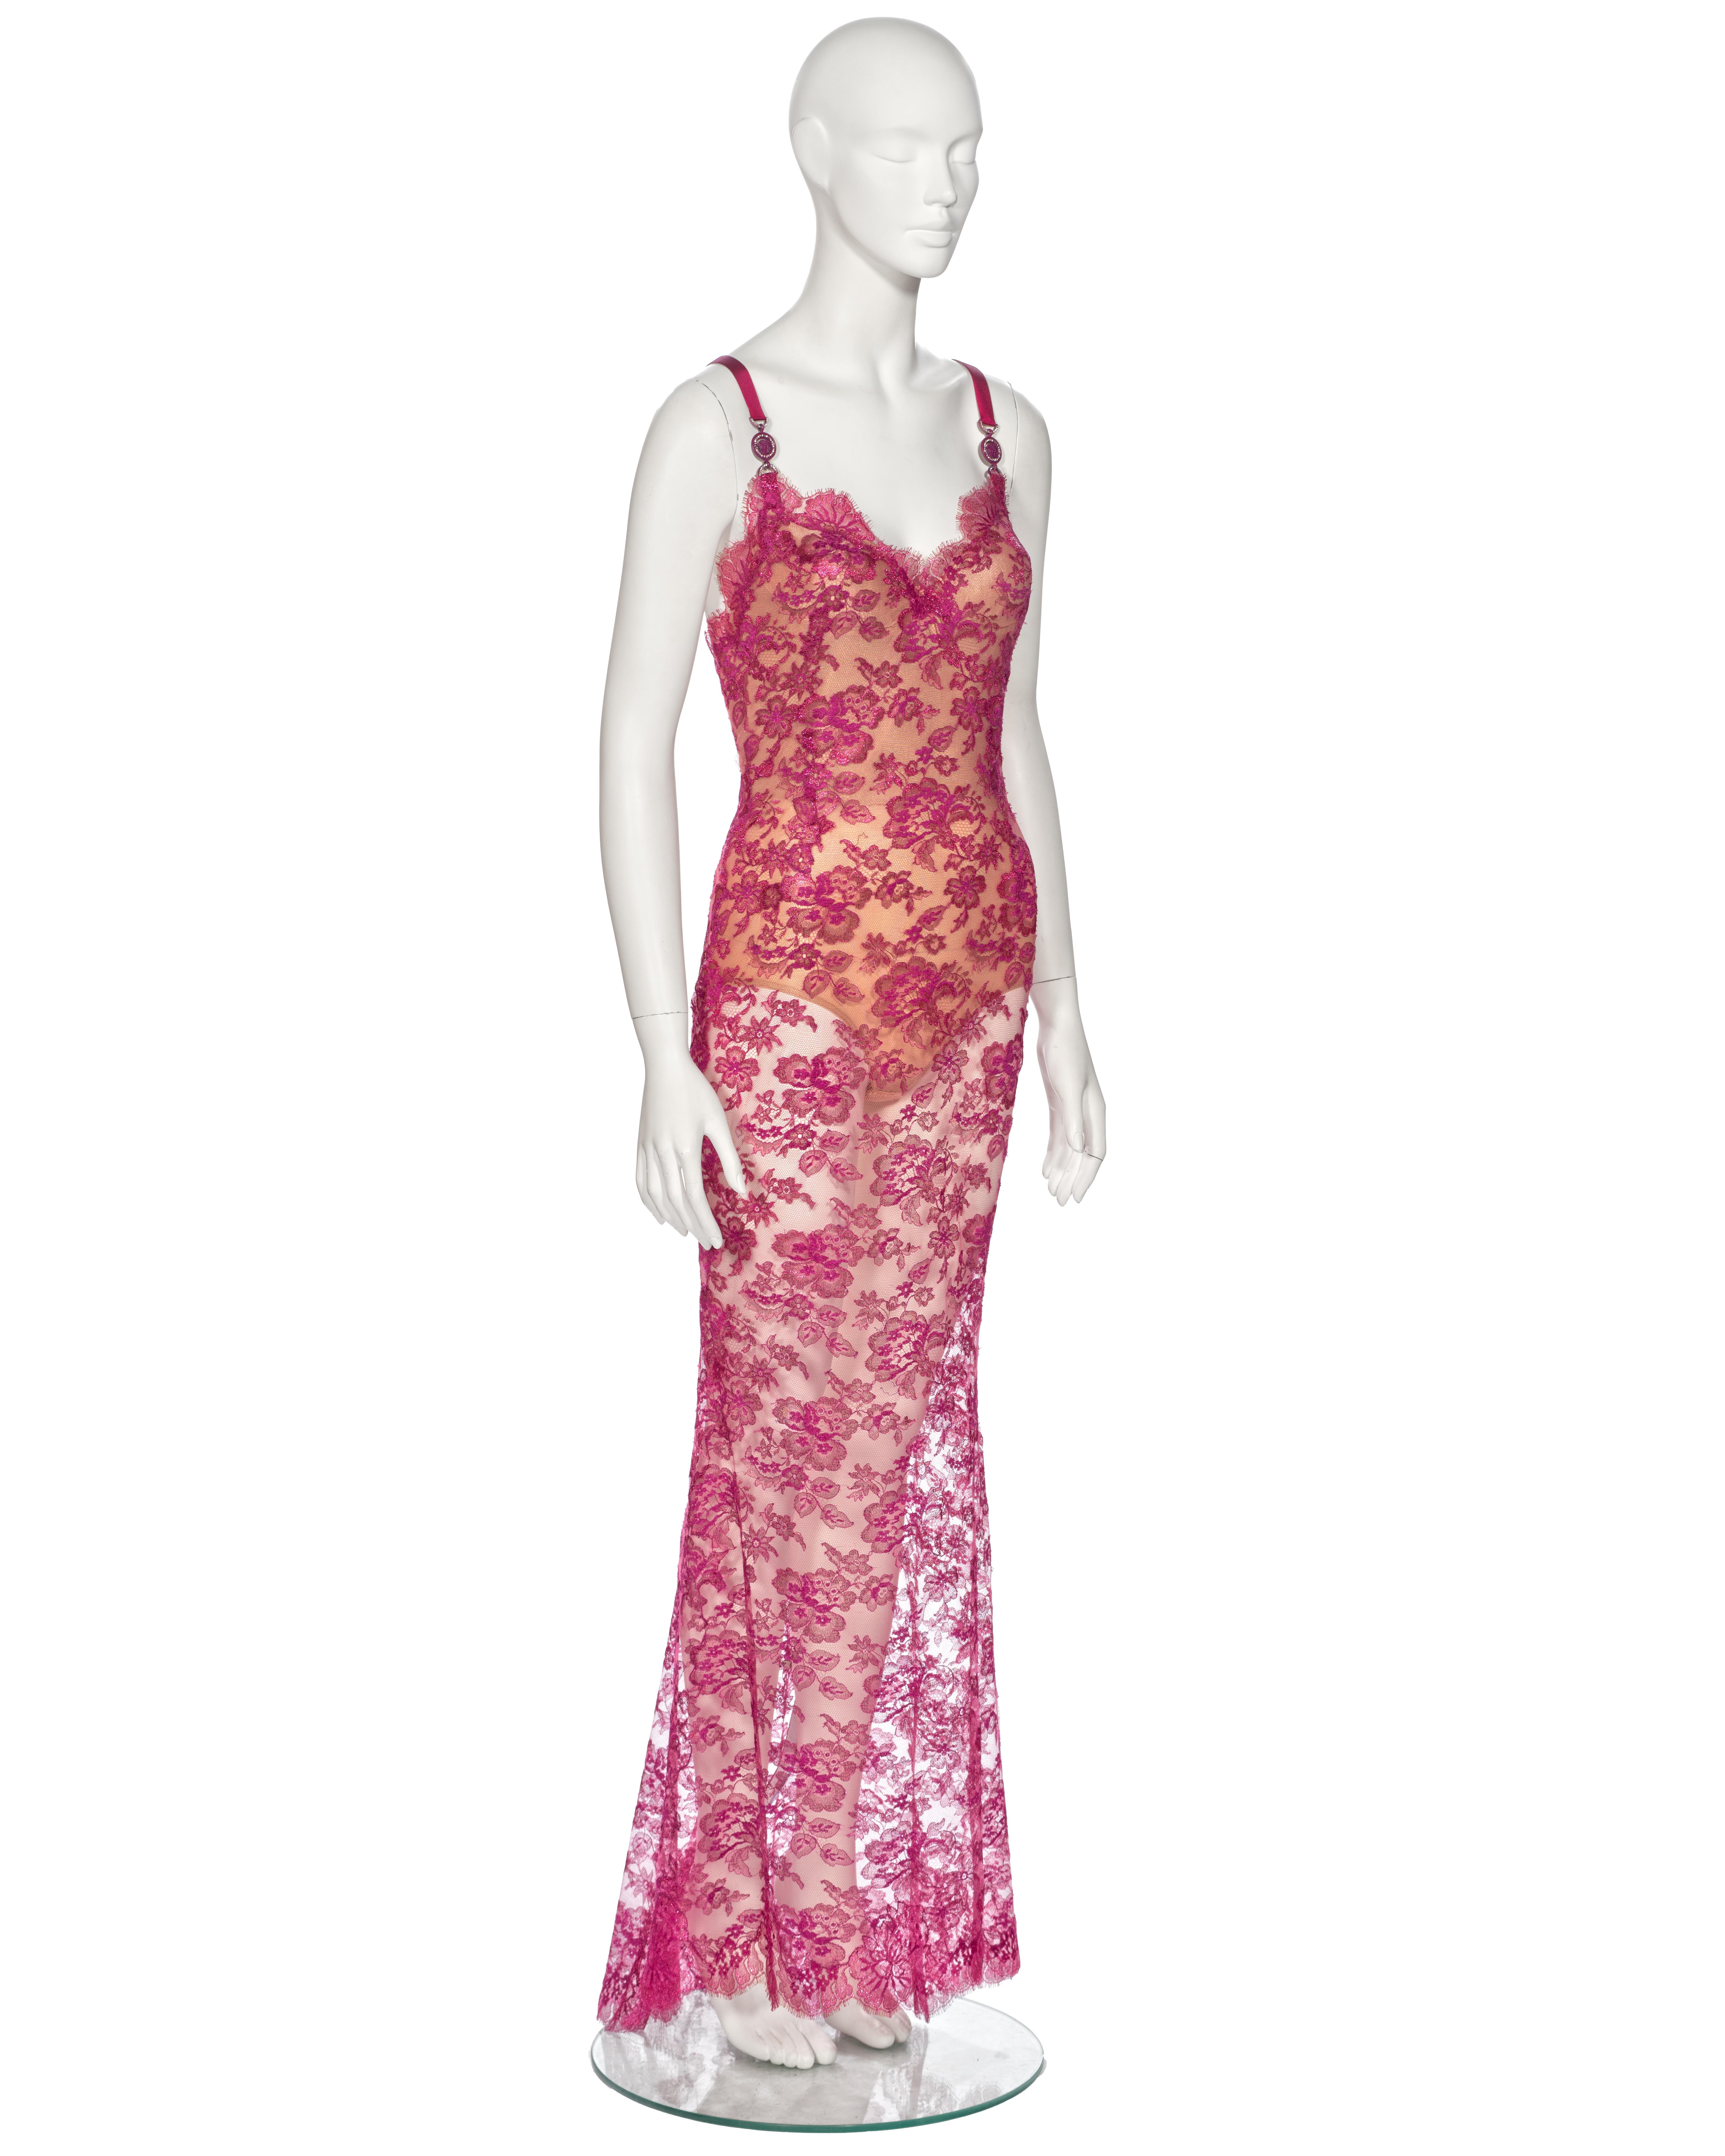 Atelier Versace Metallic Pink Couture Evening Dress and Bag, ss 1996 For Sale 5